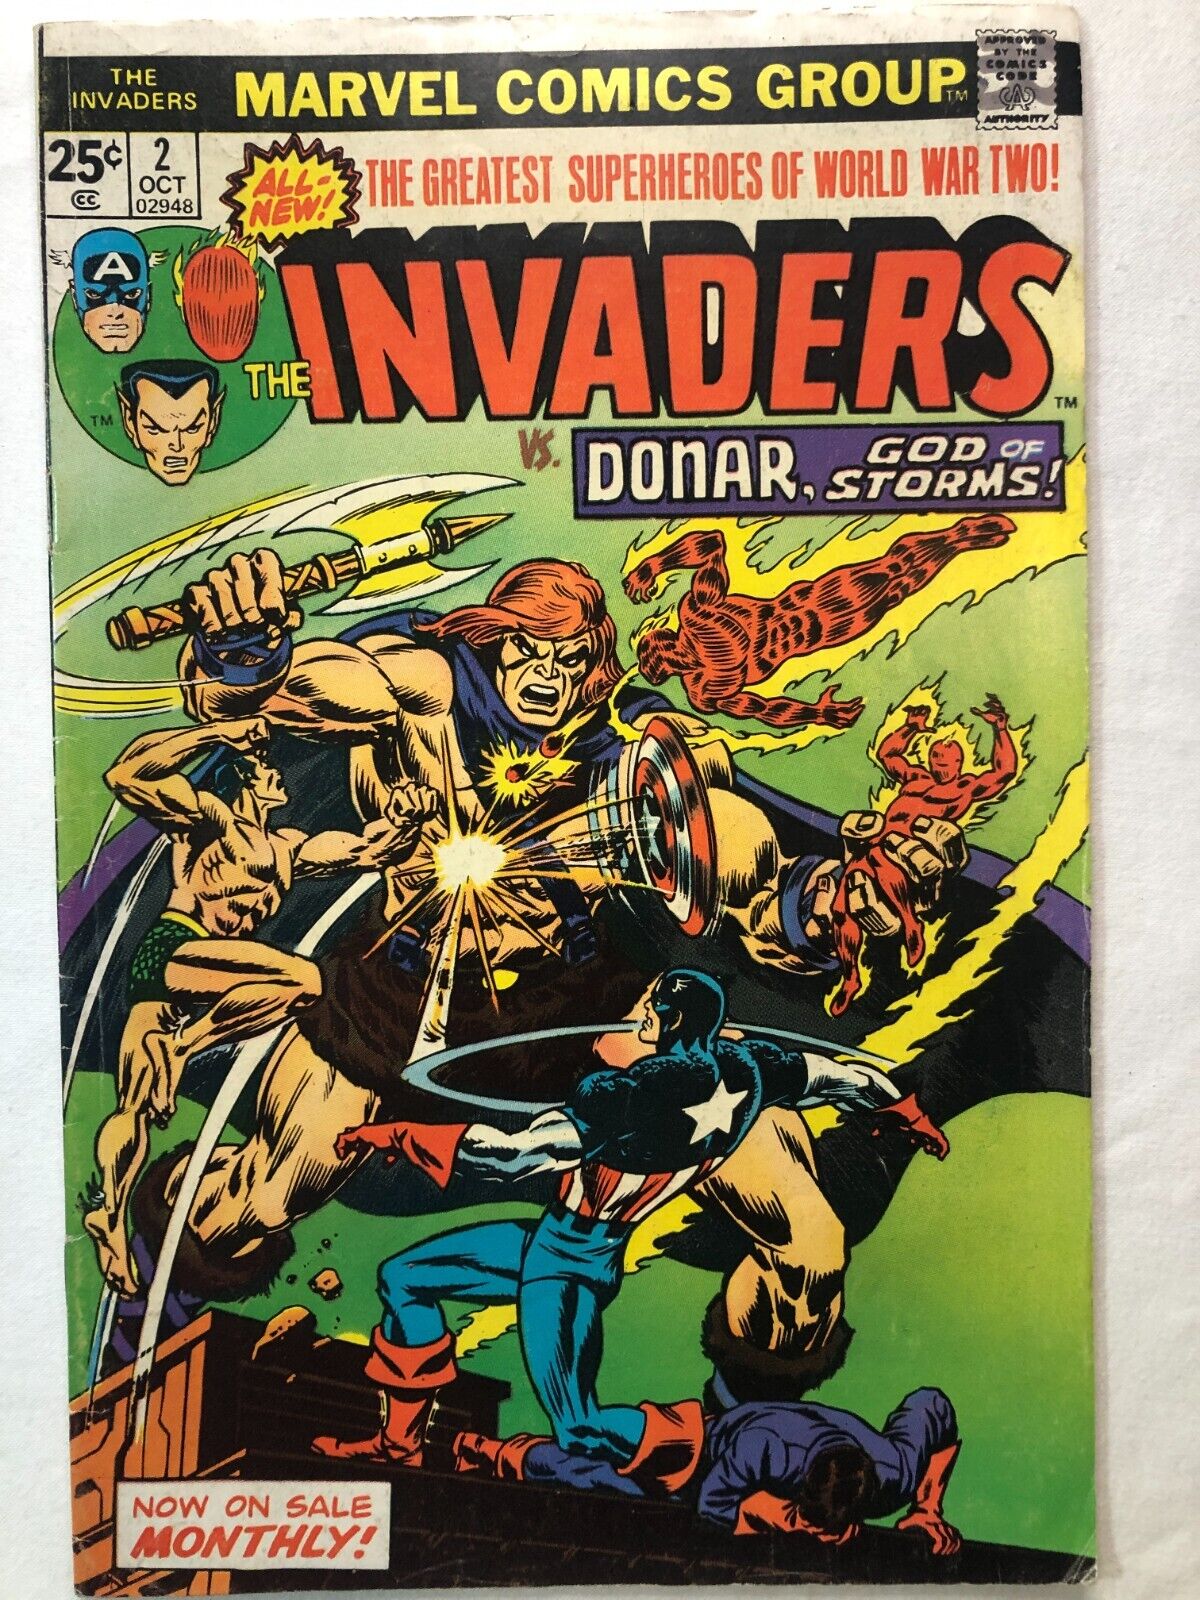 THE INVADERS #2 Oct 1975 Vintage Marvel Comics Very Nice Condition